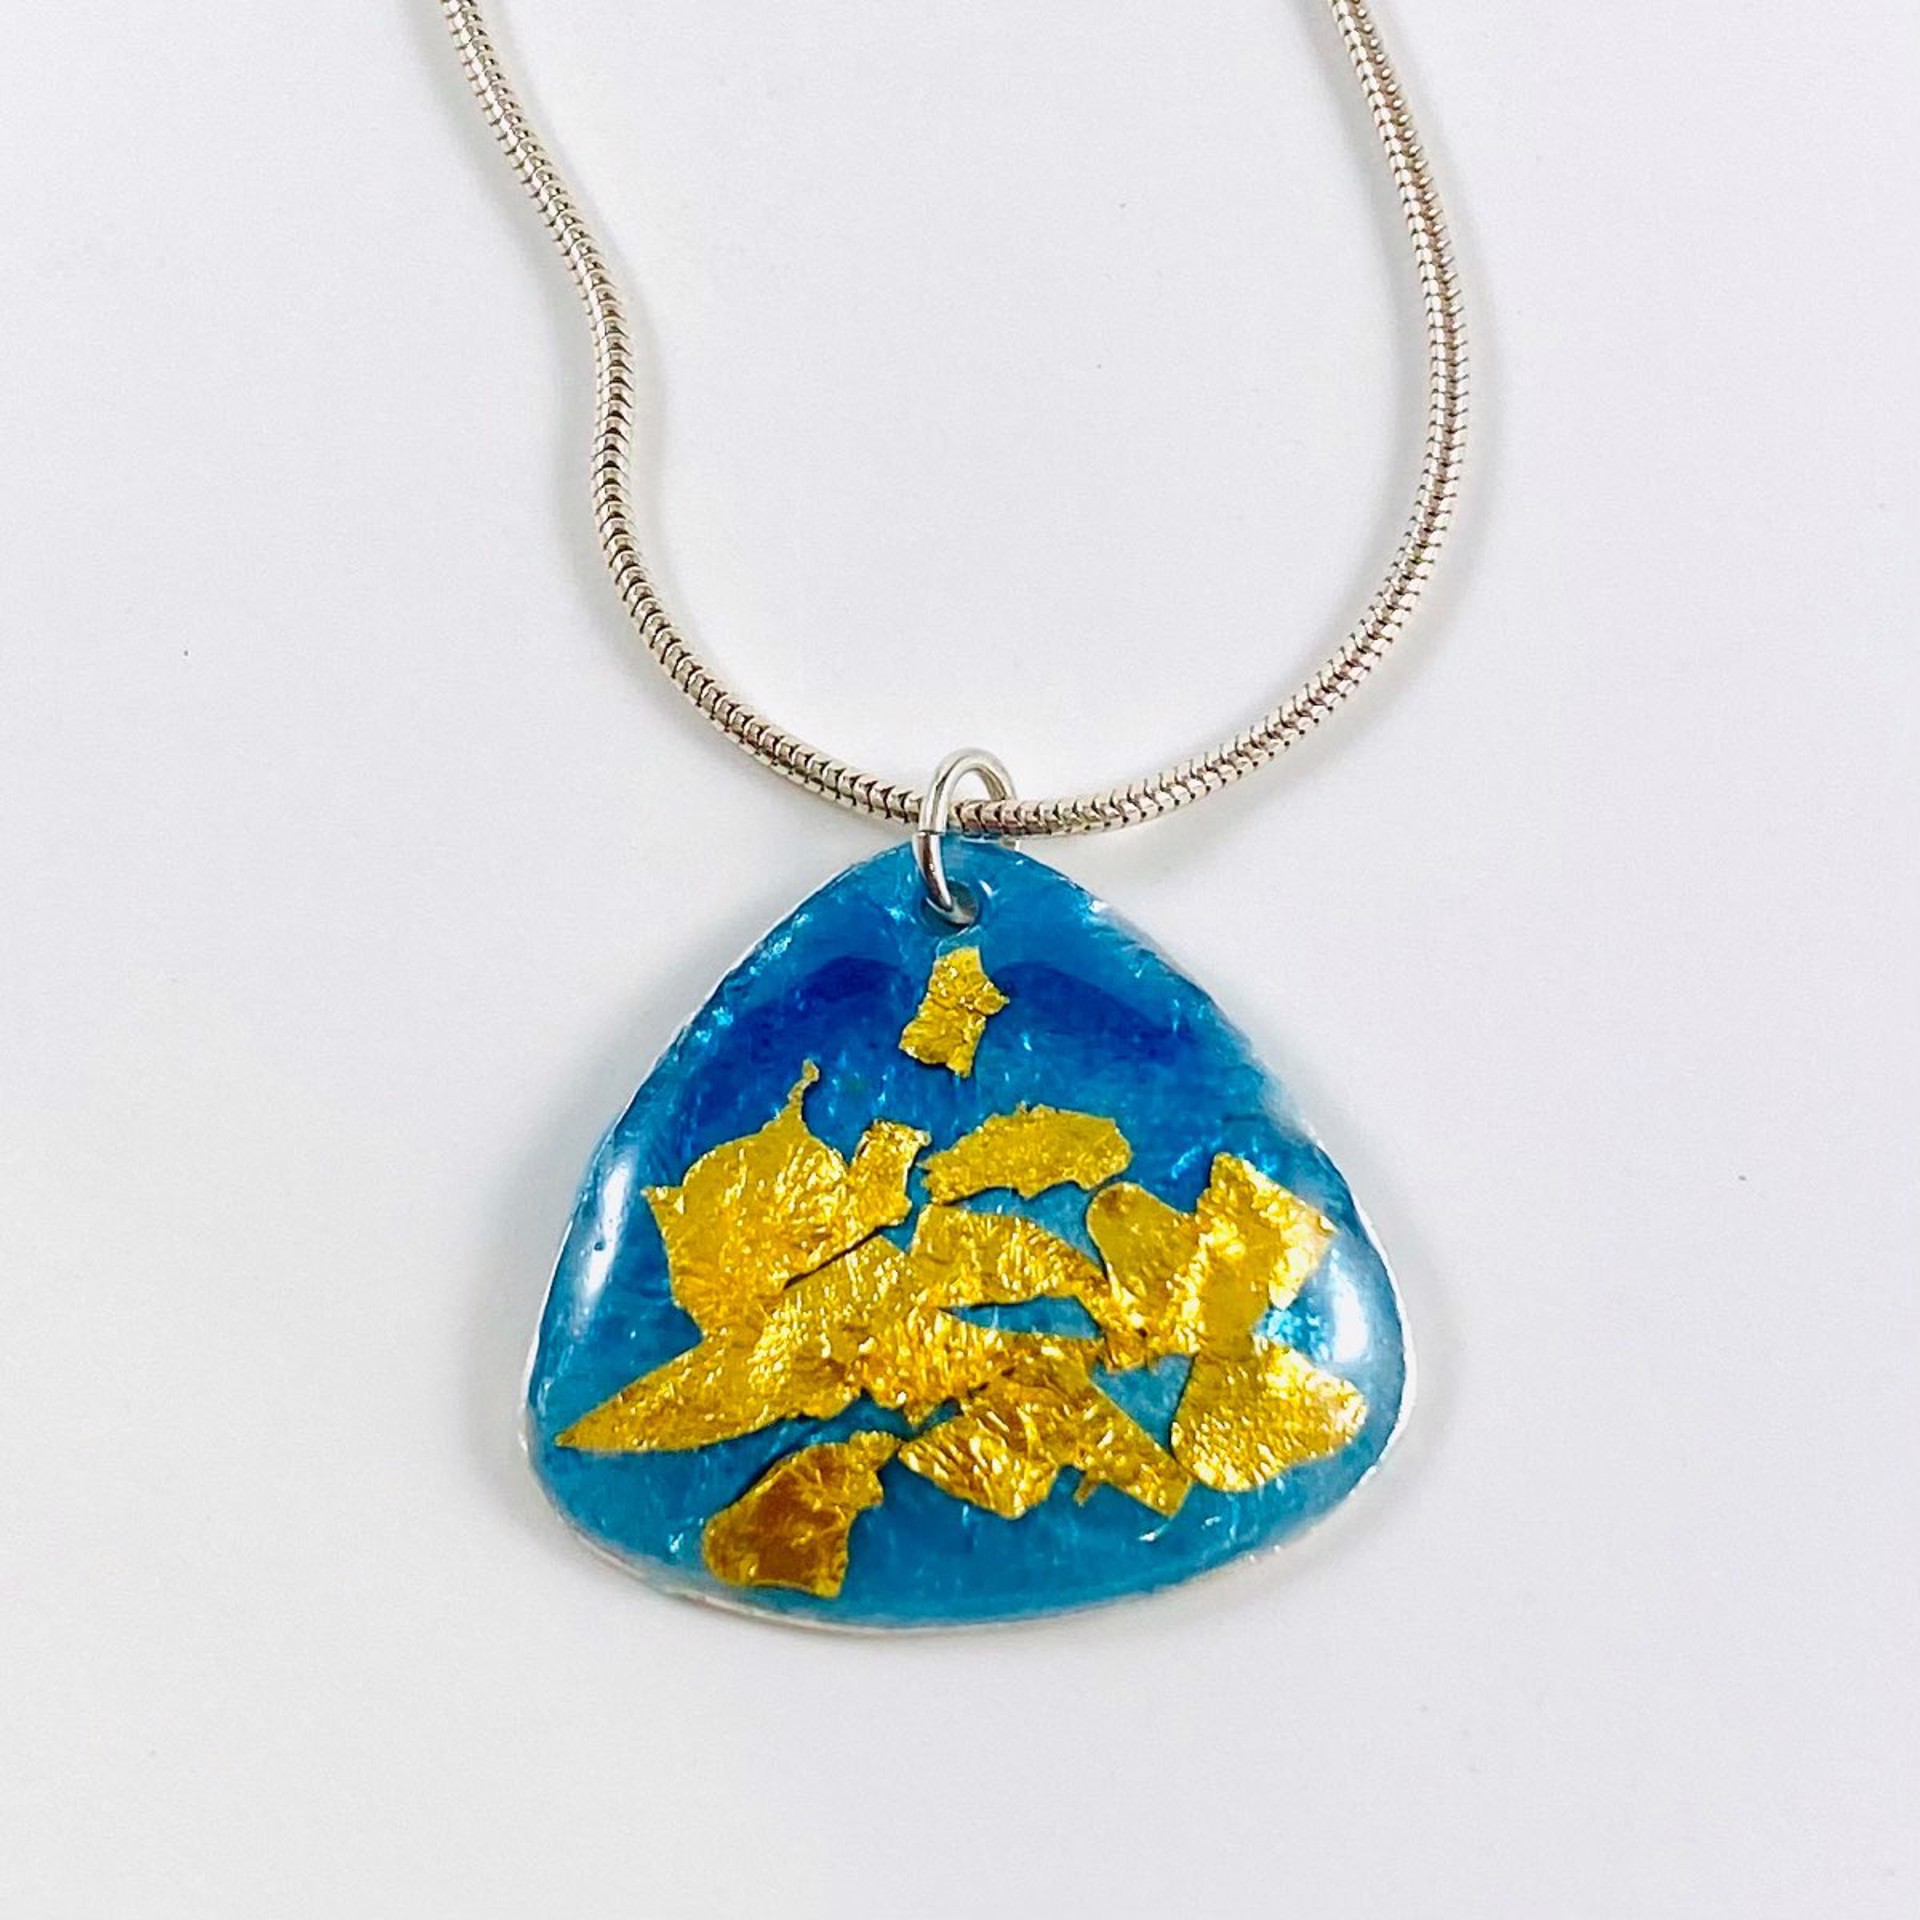 Rounded Triangle  Blue and Gold Vitreous Enamel Pendant 18"Snake Chain by Karen Hakim